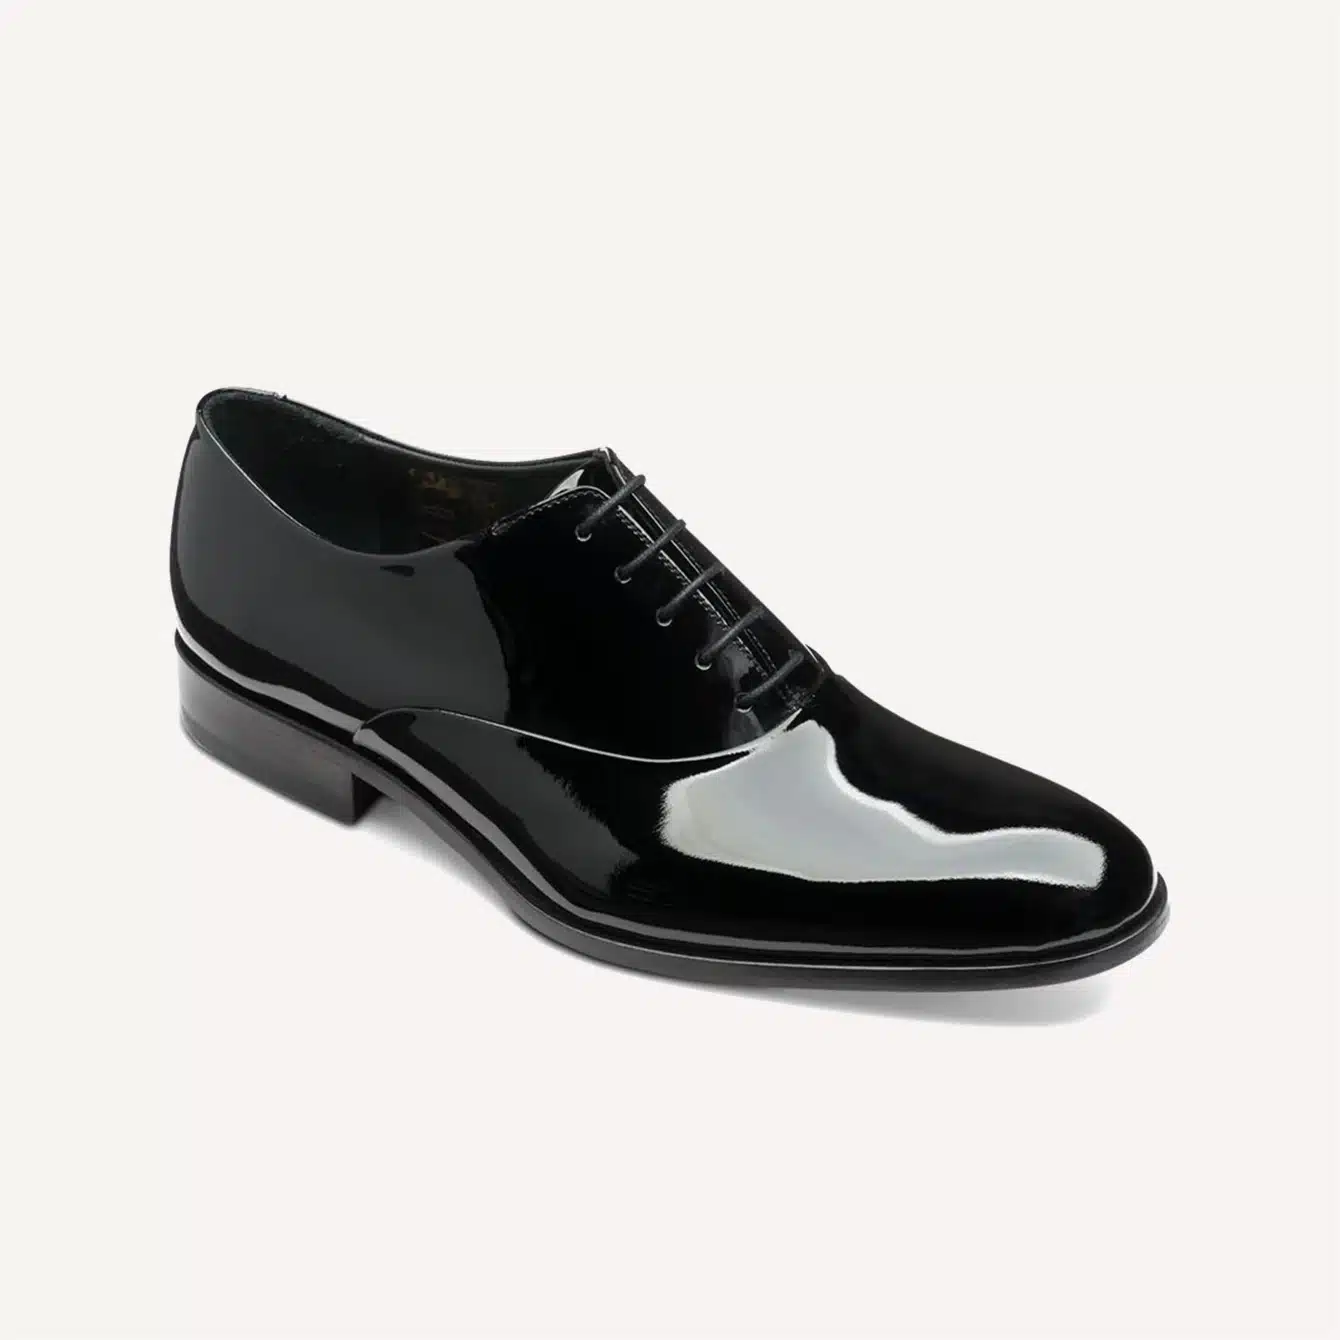 Todd Snyder Loake Patent Dress Shoes